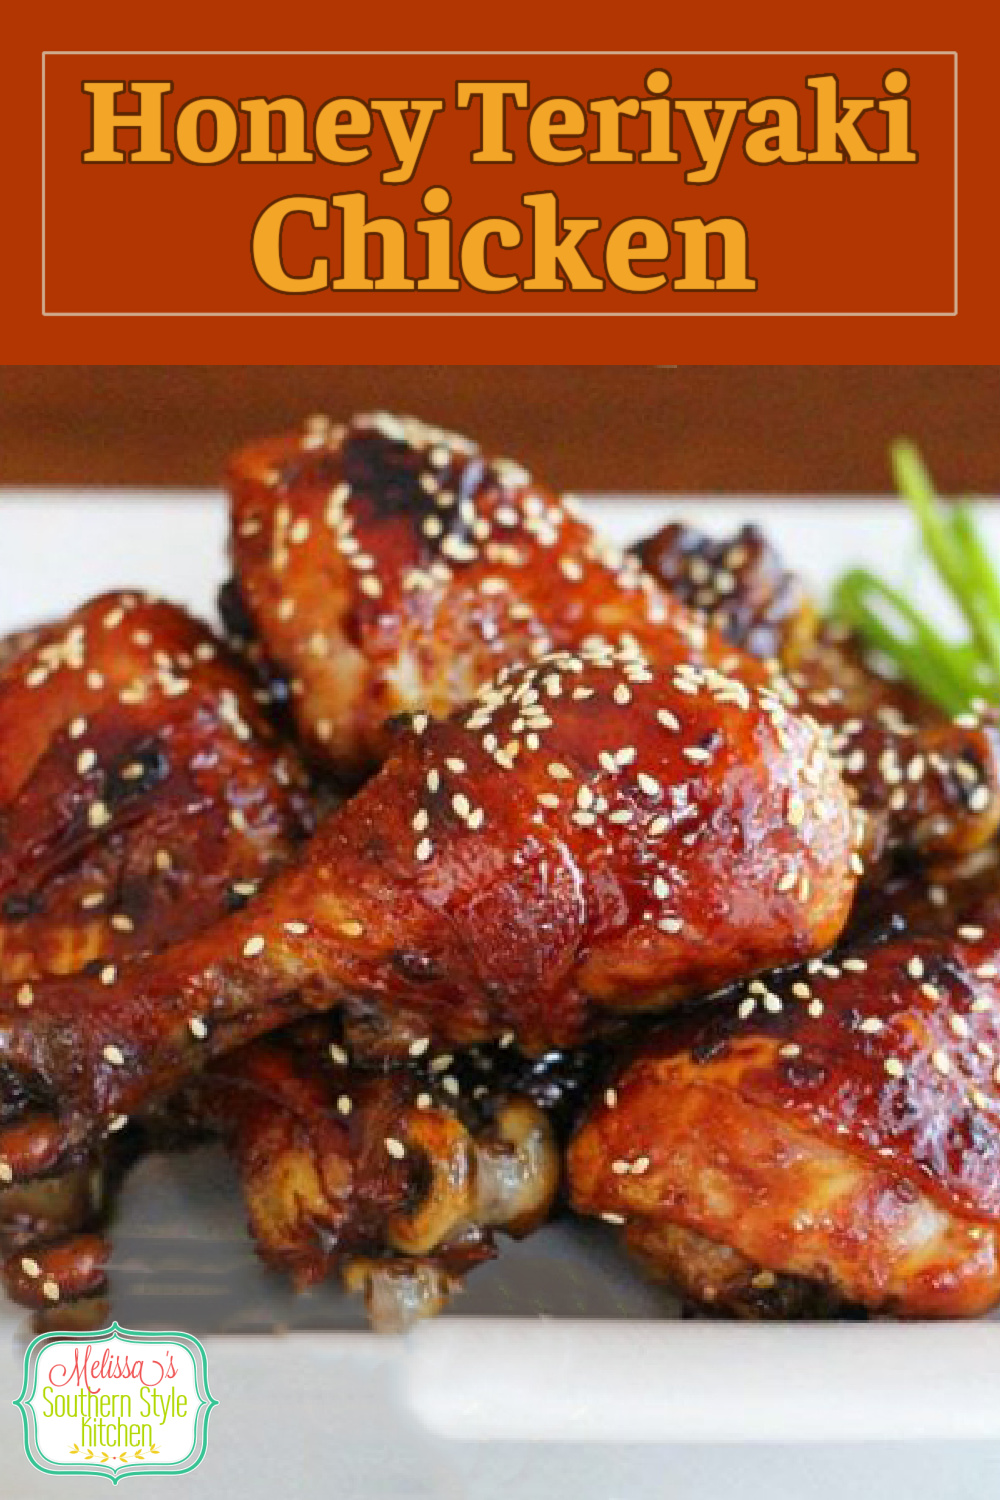 This sweet and spicy Asian inspired chicken melts in your mouth! #honeyteriyakichicken #teriyakichicken #easychickenrecipes #teriyakichicken #asianinspired #chicken #teriyakisauce #30minutemeals #dinner #dinnerideas #southernrecipes #southernfood